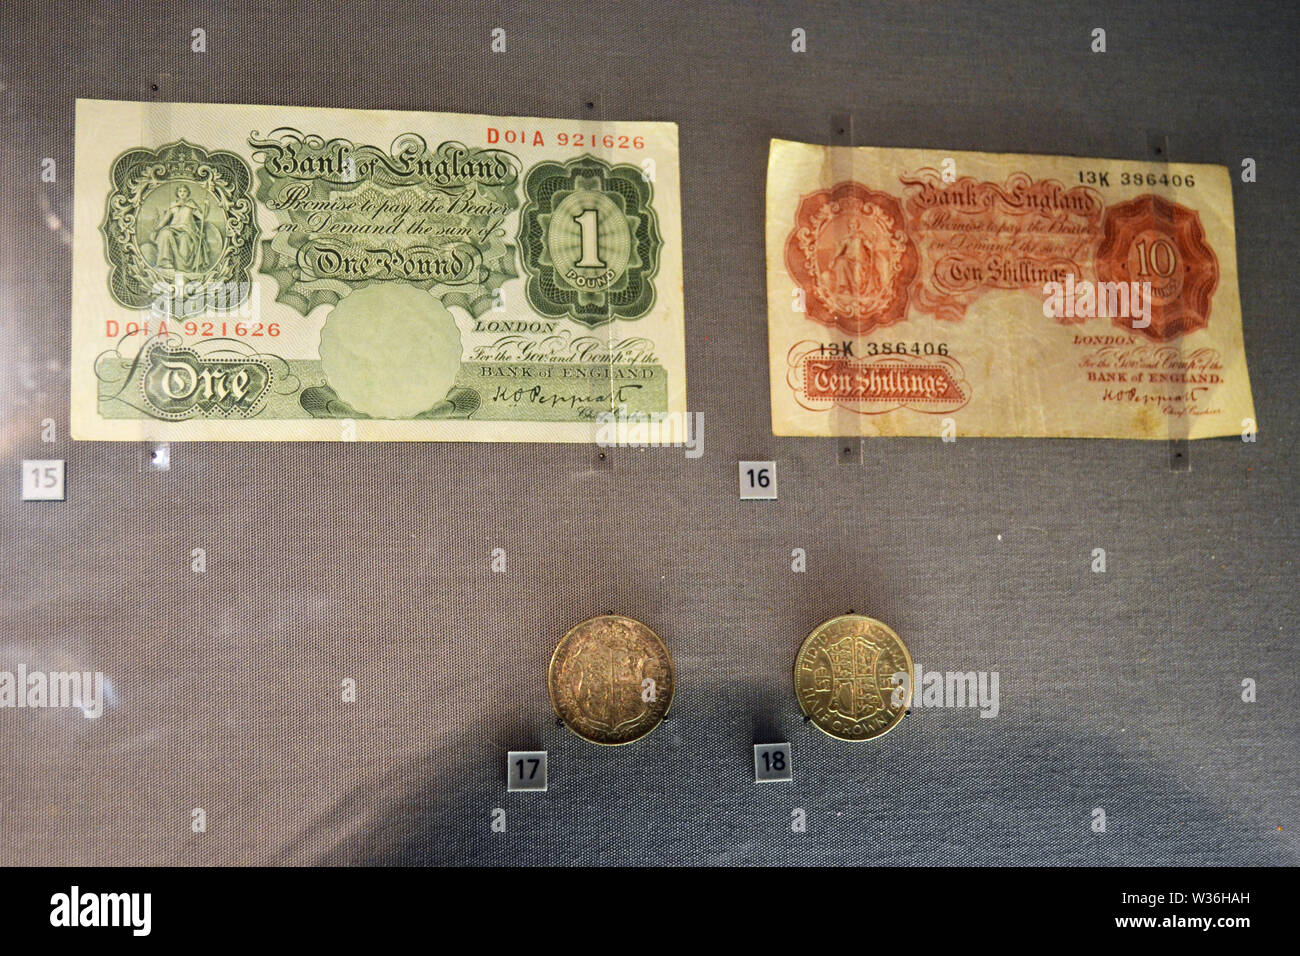 The original £1 note and Ten Shillings note issued by the Bank of England, 1934-1948. Half Crown coins. Manchester Museum, University of Manchester UK Stock Photo